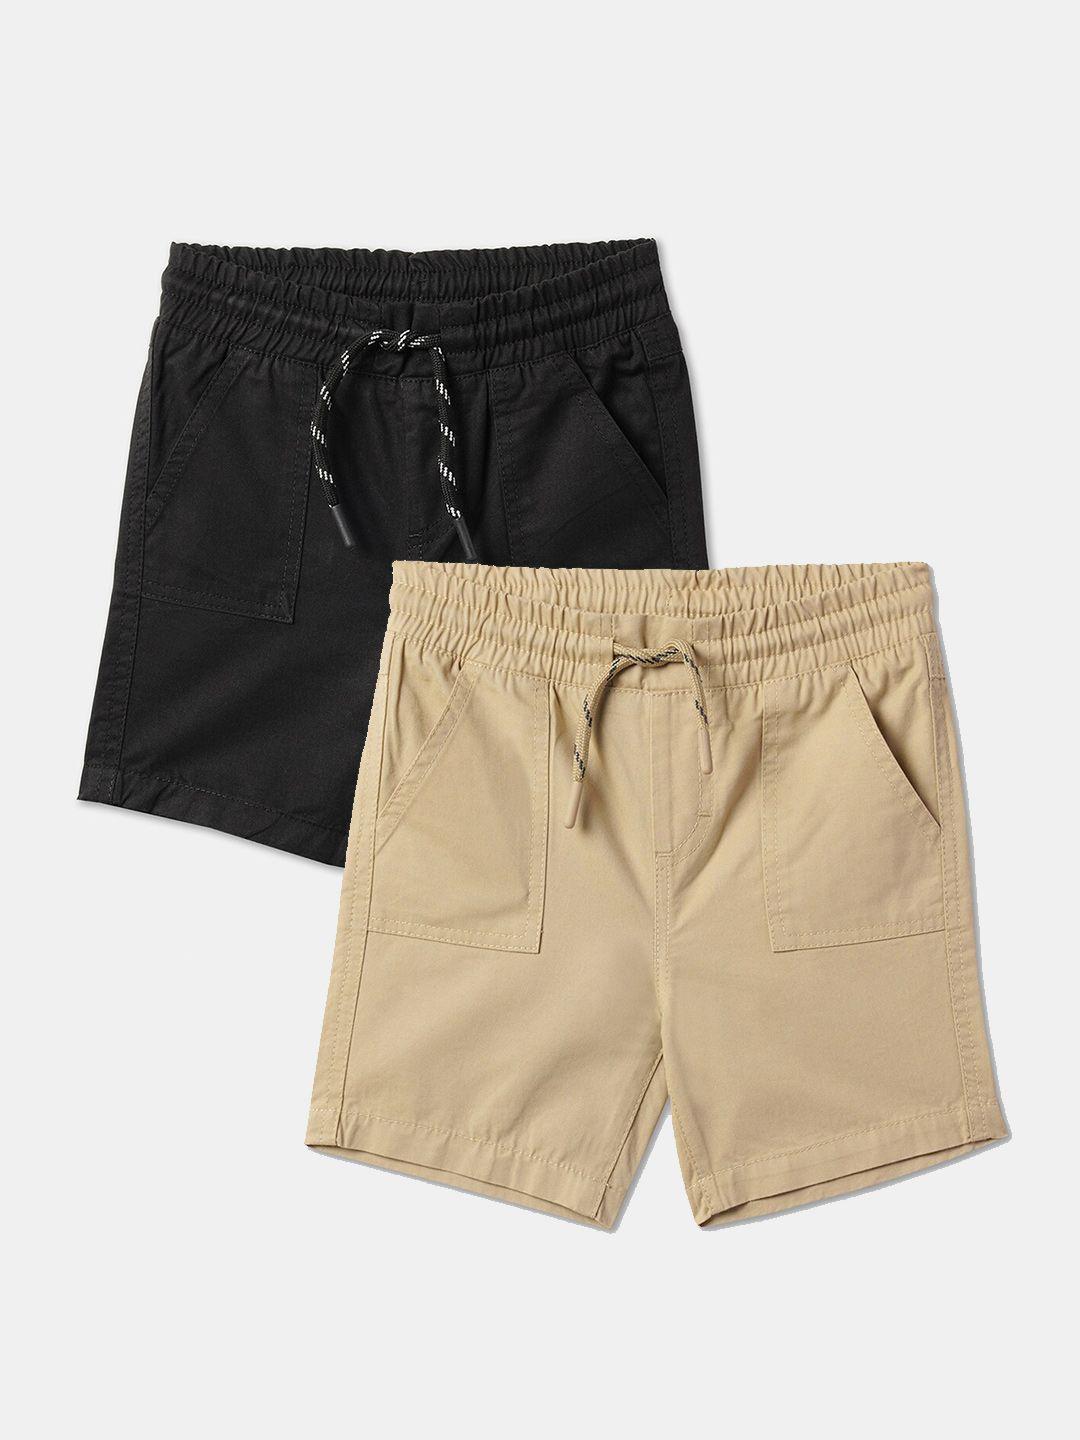 r&b infant boys pack of 2 mid-rise cotton shorts